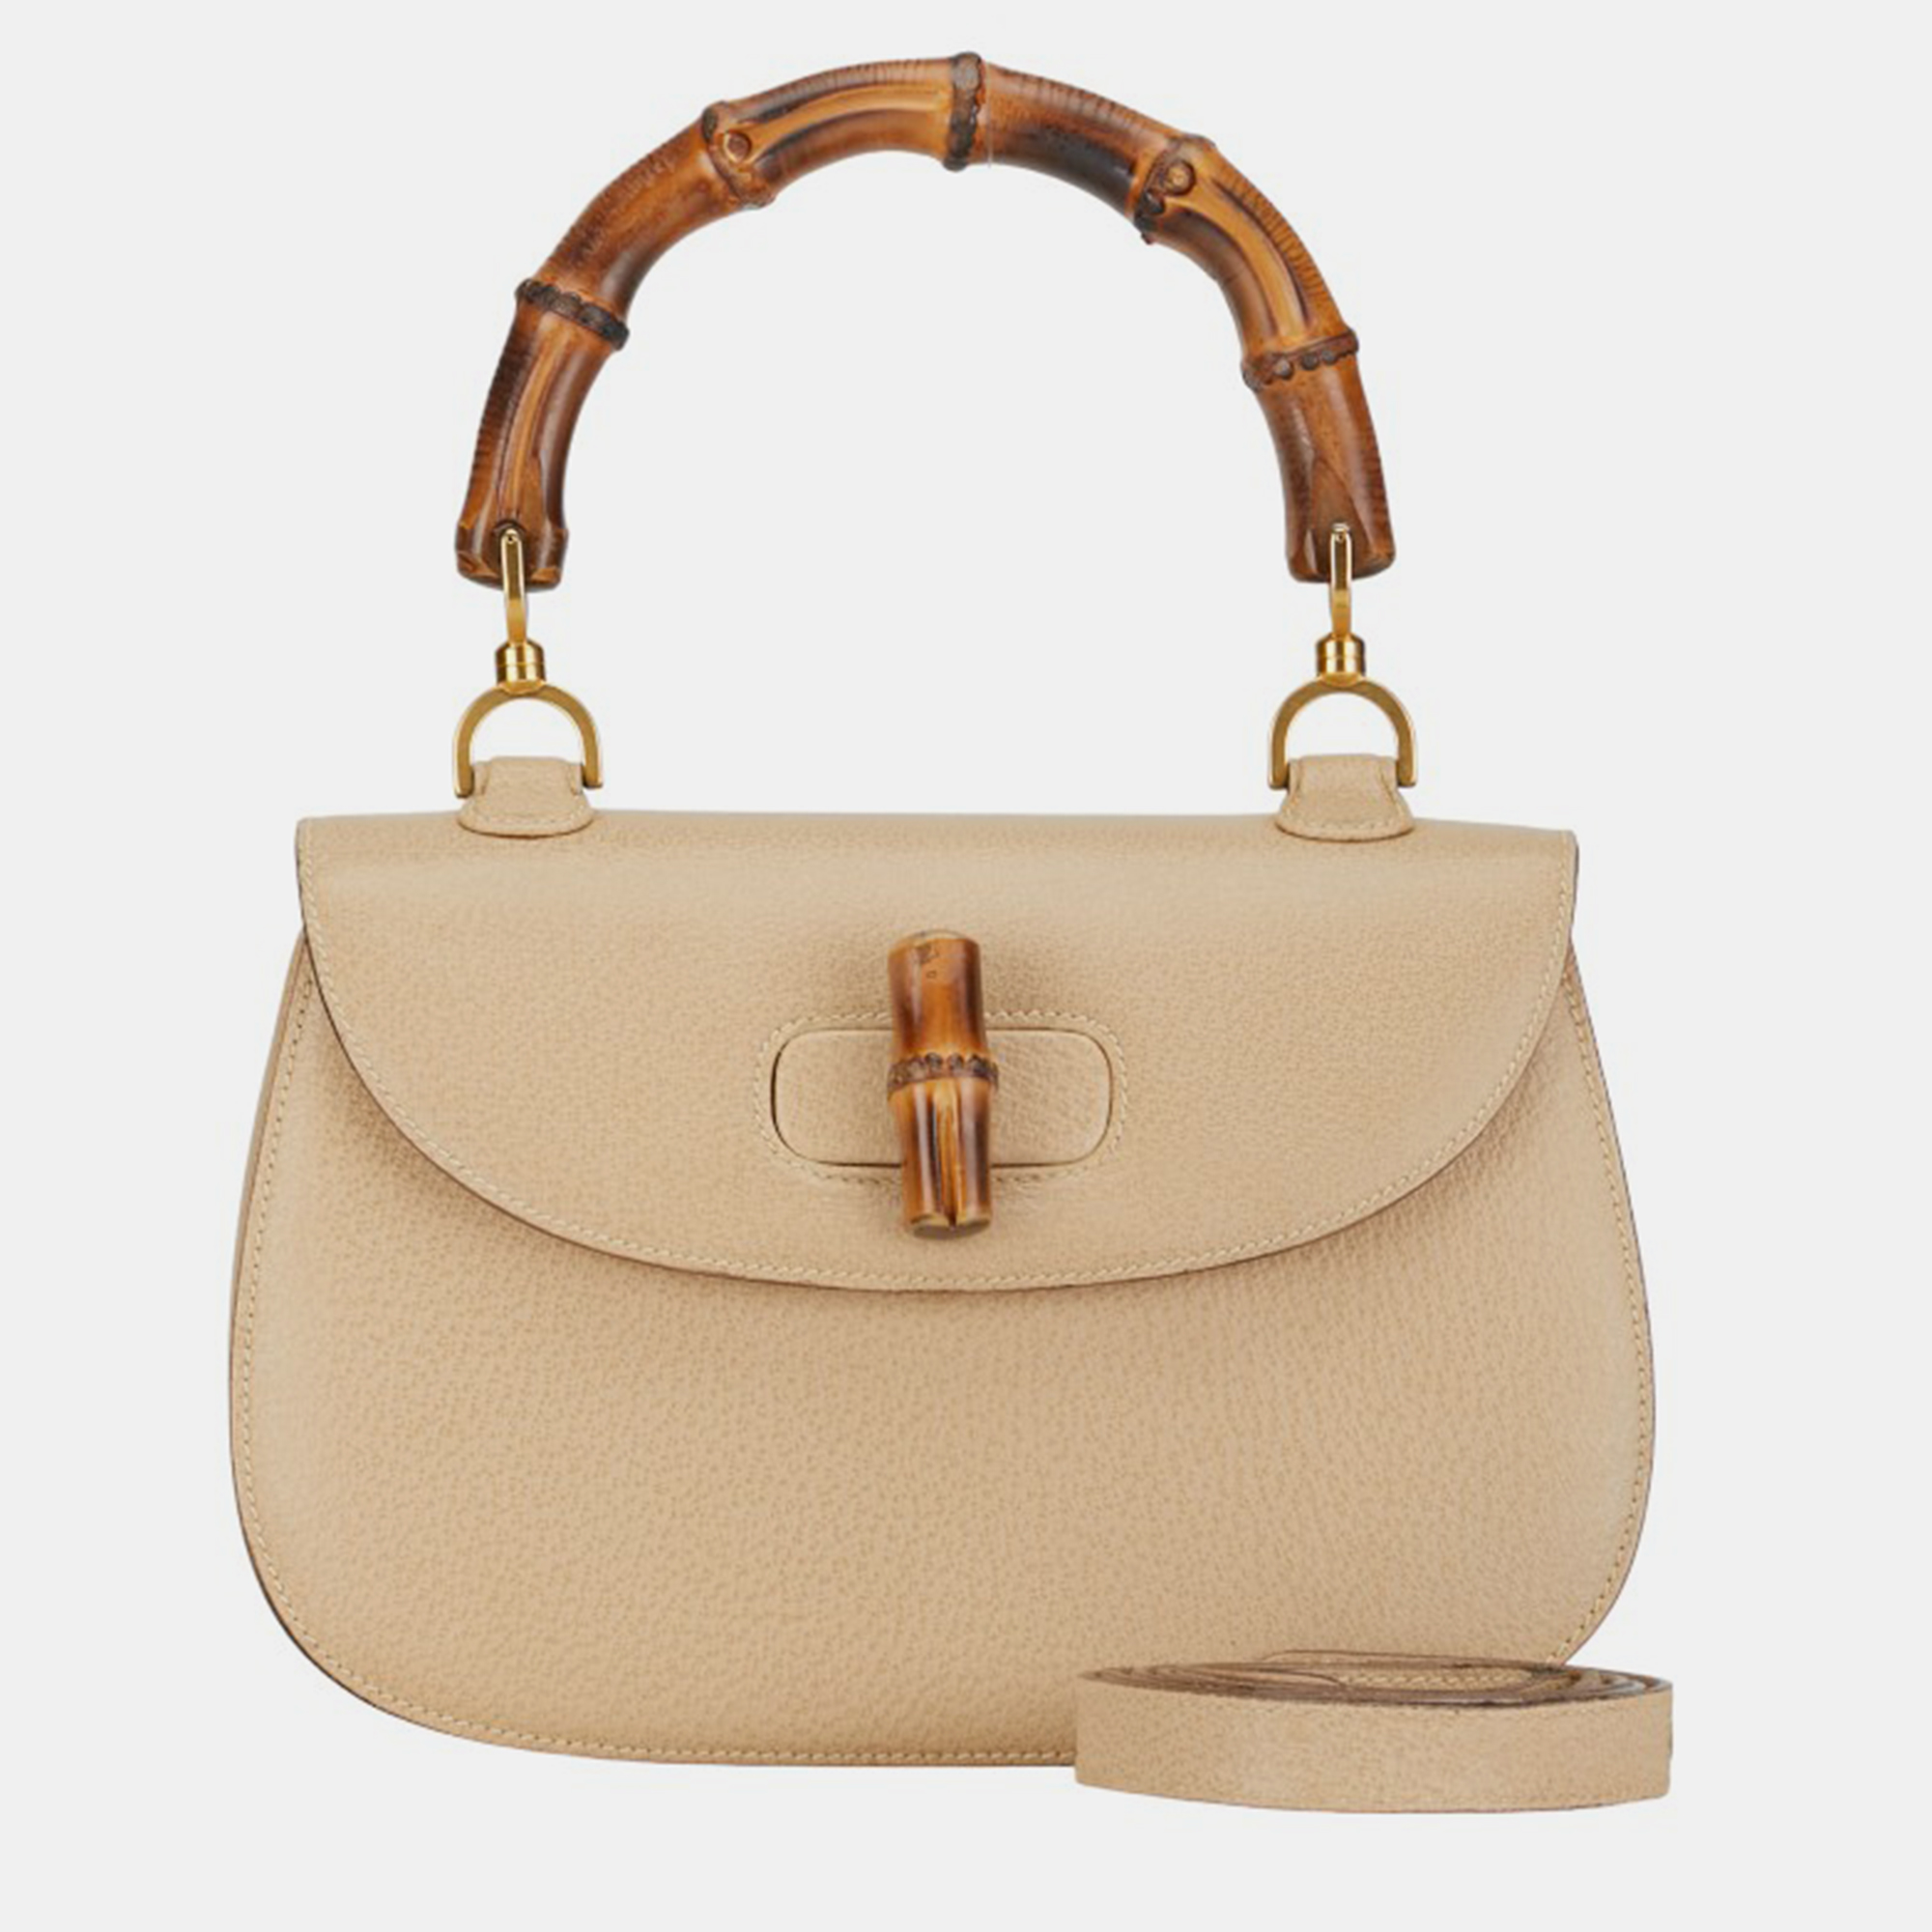 Gucci beige leather 1947 bamboo top handle bag